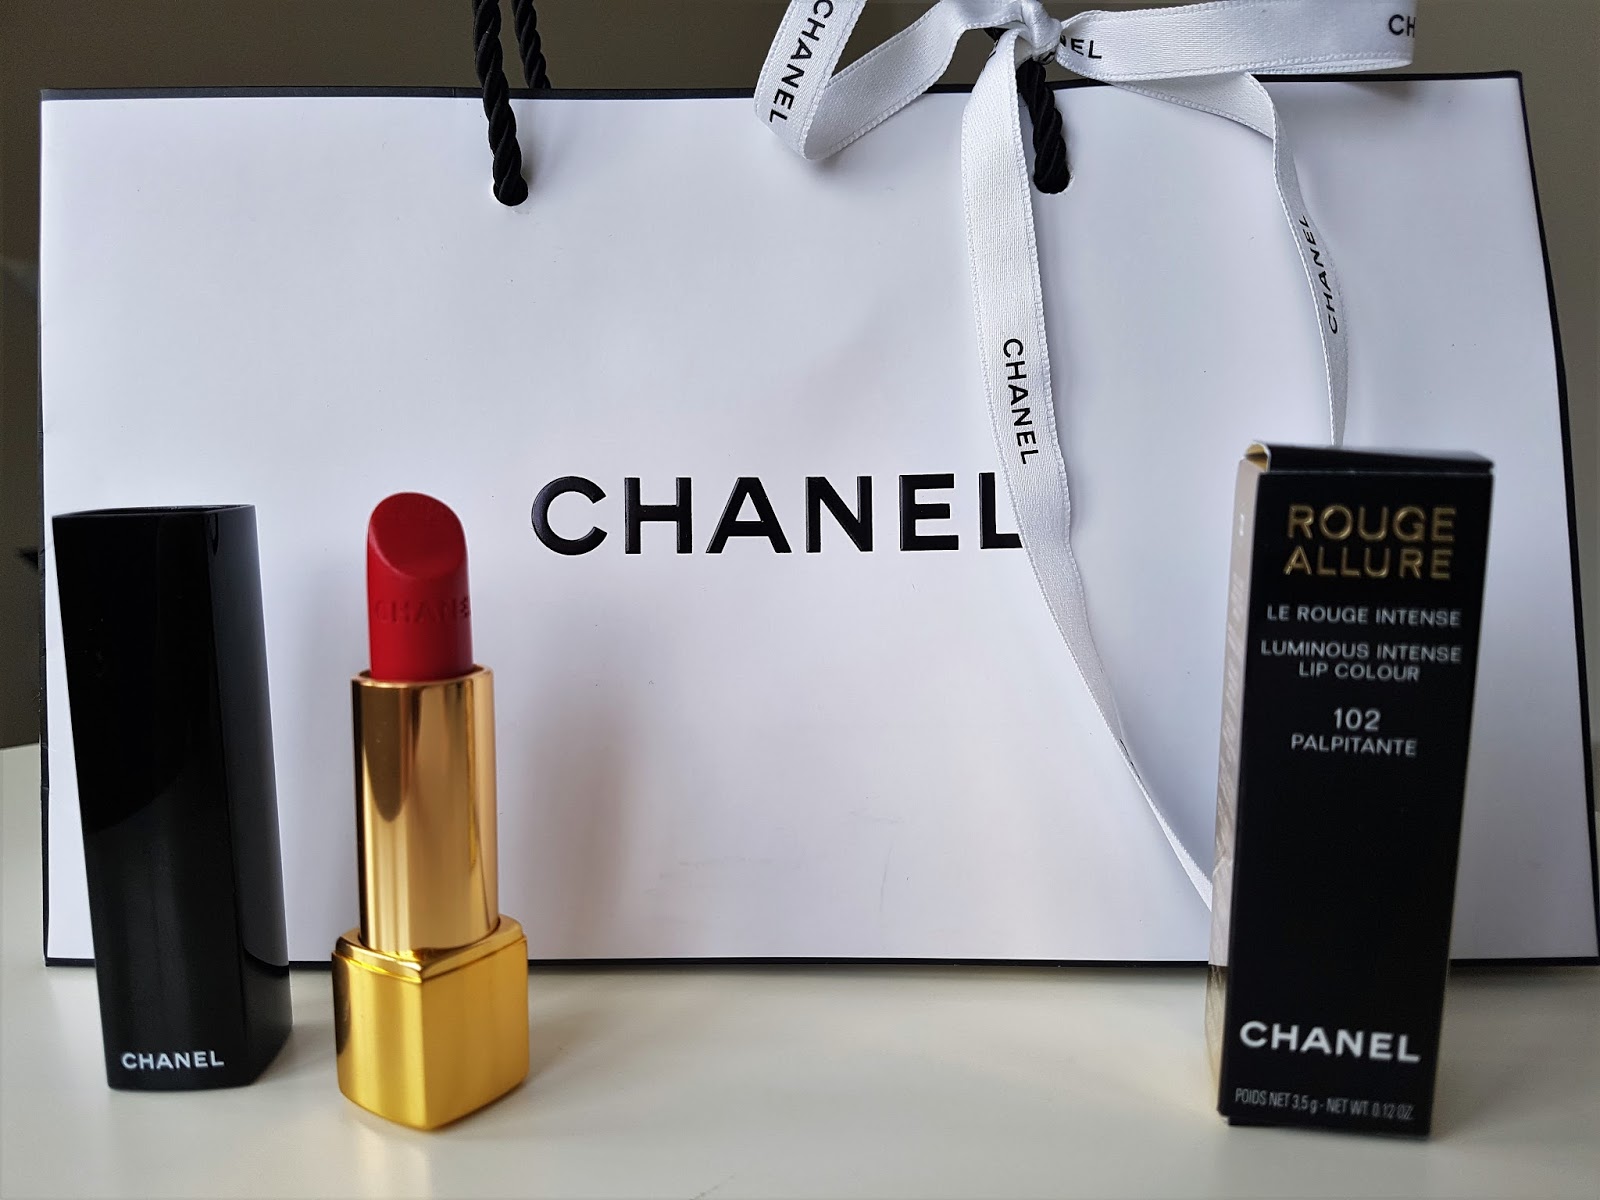 THE EXCLUSIVE BEAUTY DIARY : CHANEL ROUGE ALLURE LUMINOUS INTENSE LIP COLOUR - 102 & OF LIPSTICKS